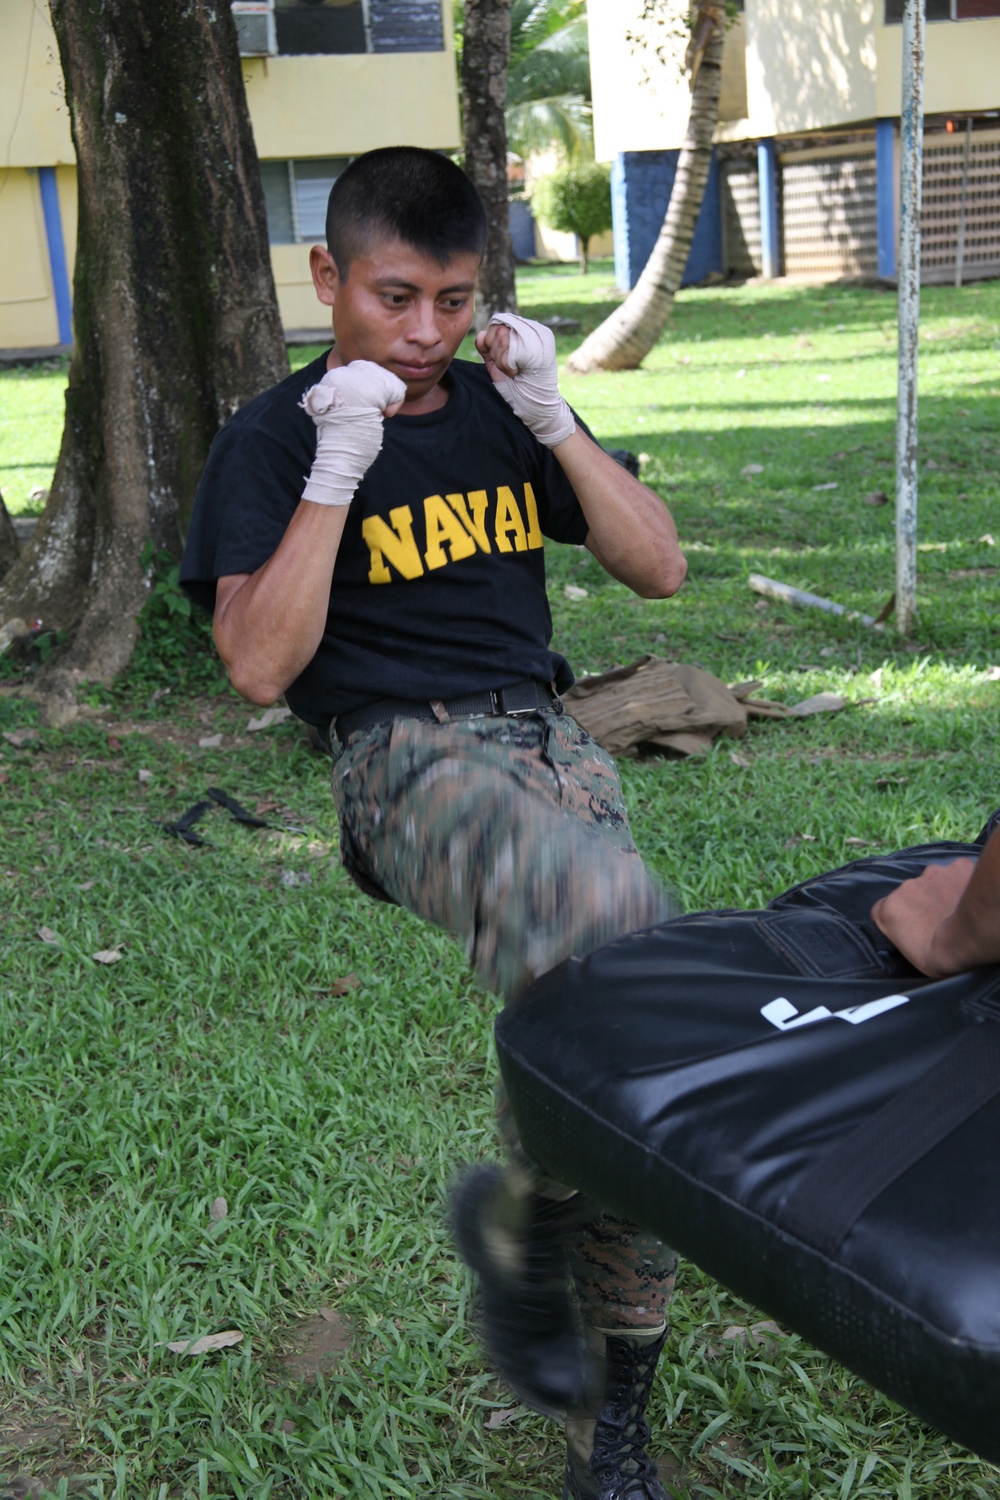 Continuing Promise Marines teach martial arts to Guatemalan Marines